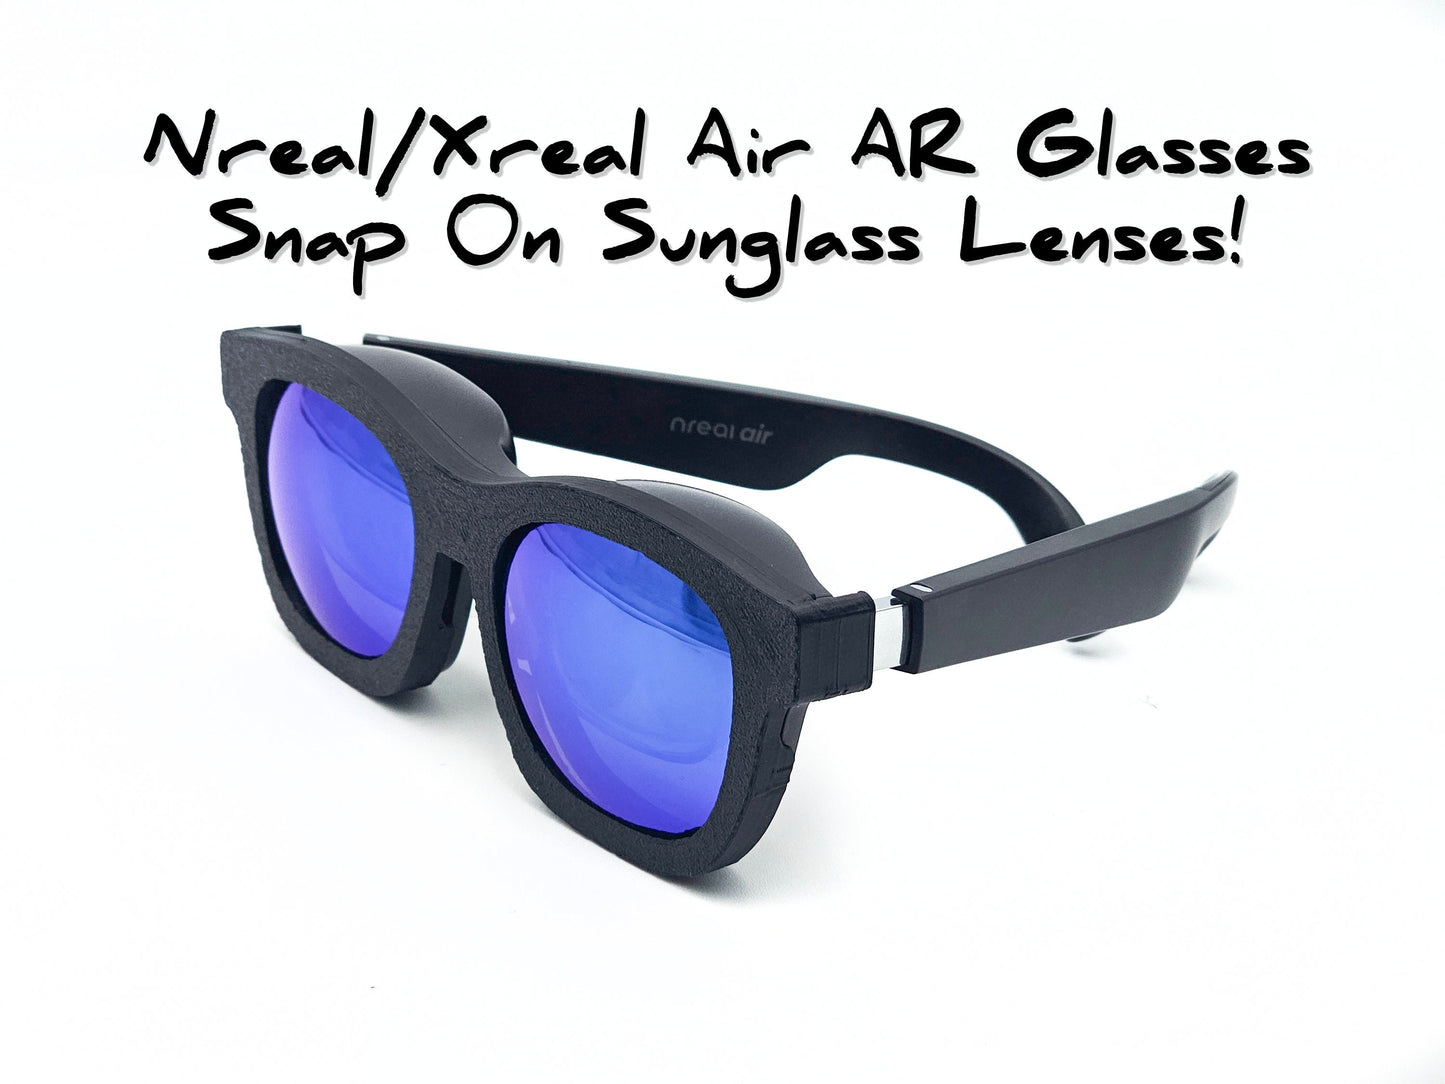 Xreal AR Air, Air 2 & Air 2 pro Glasses snap on Sunglasses (with or without Lenses)